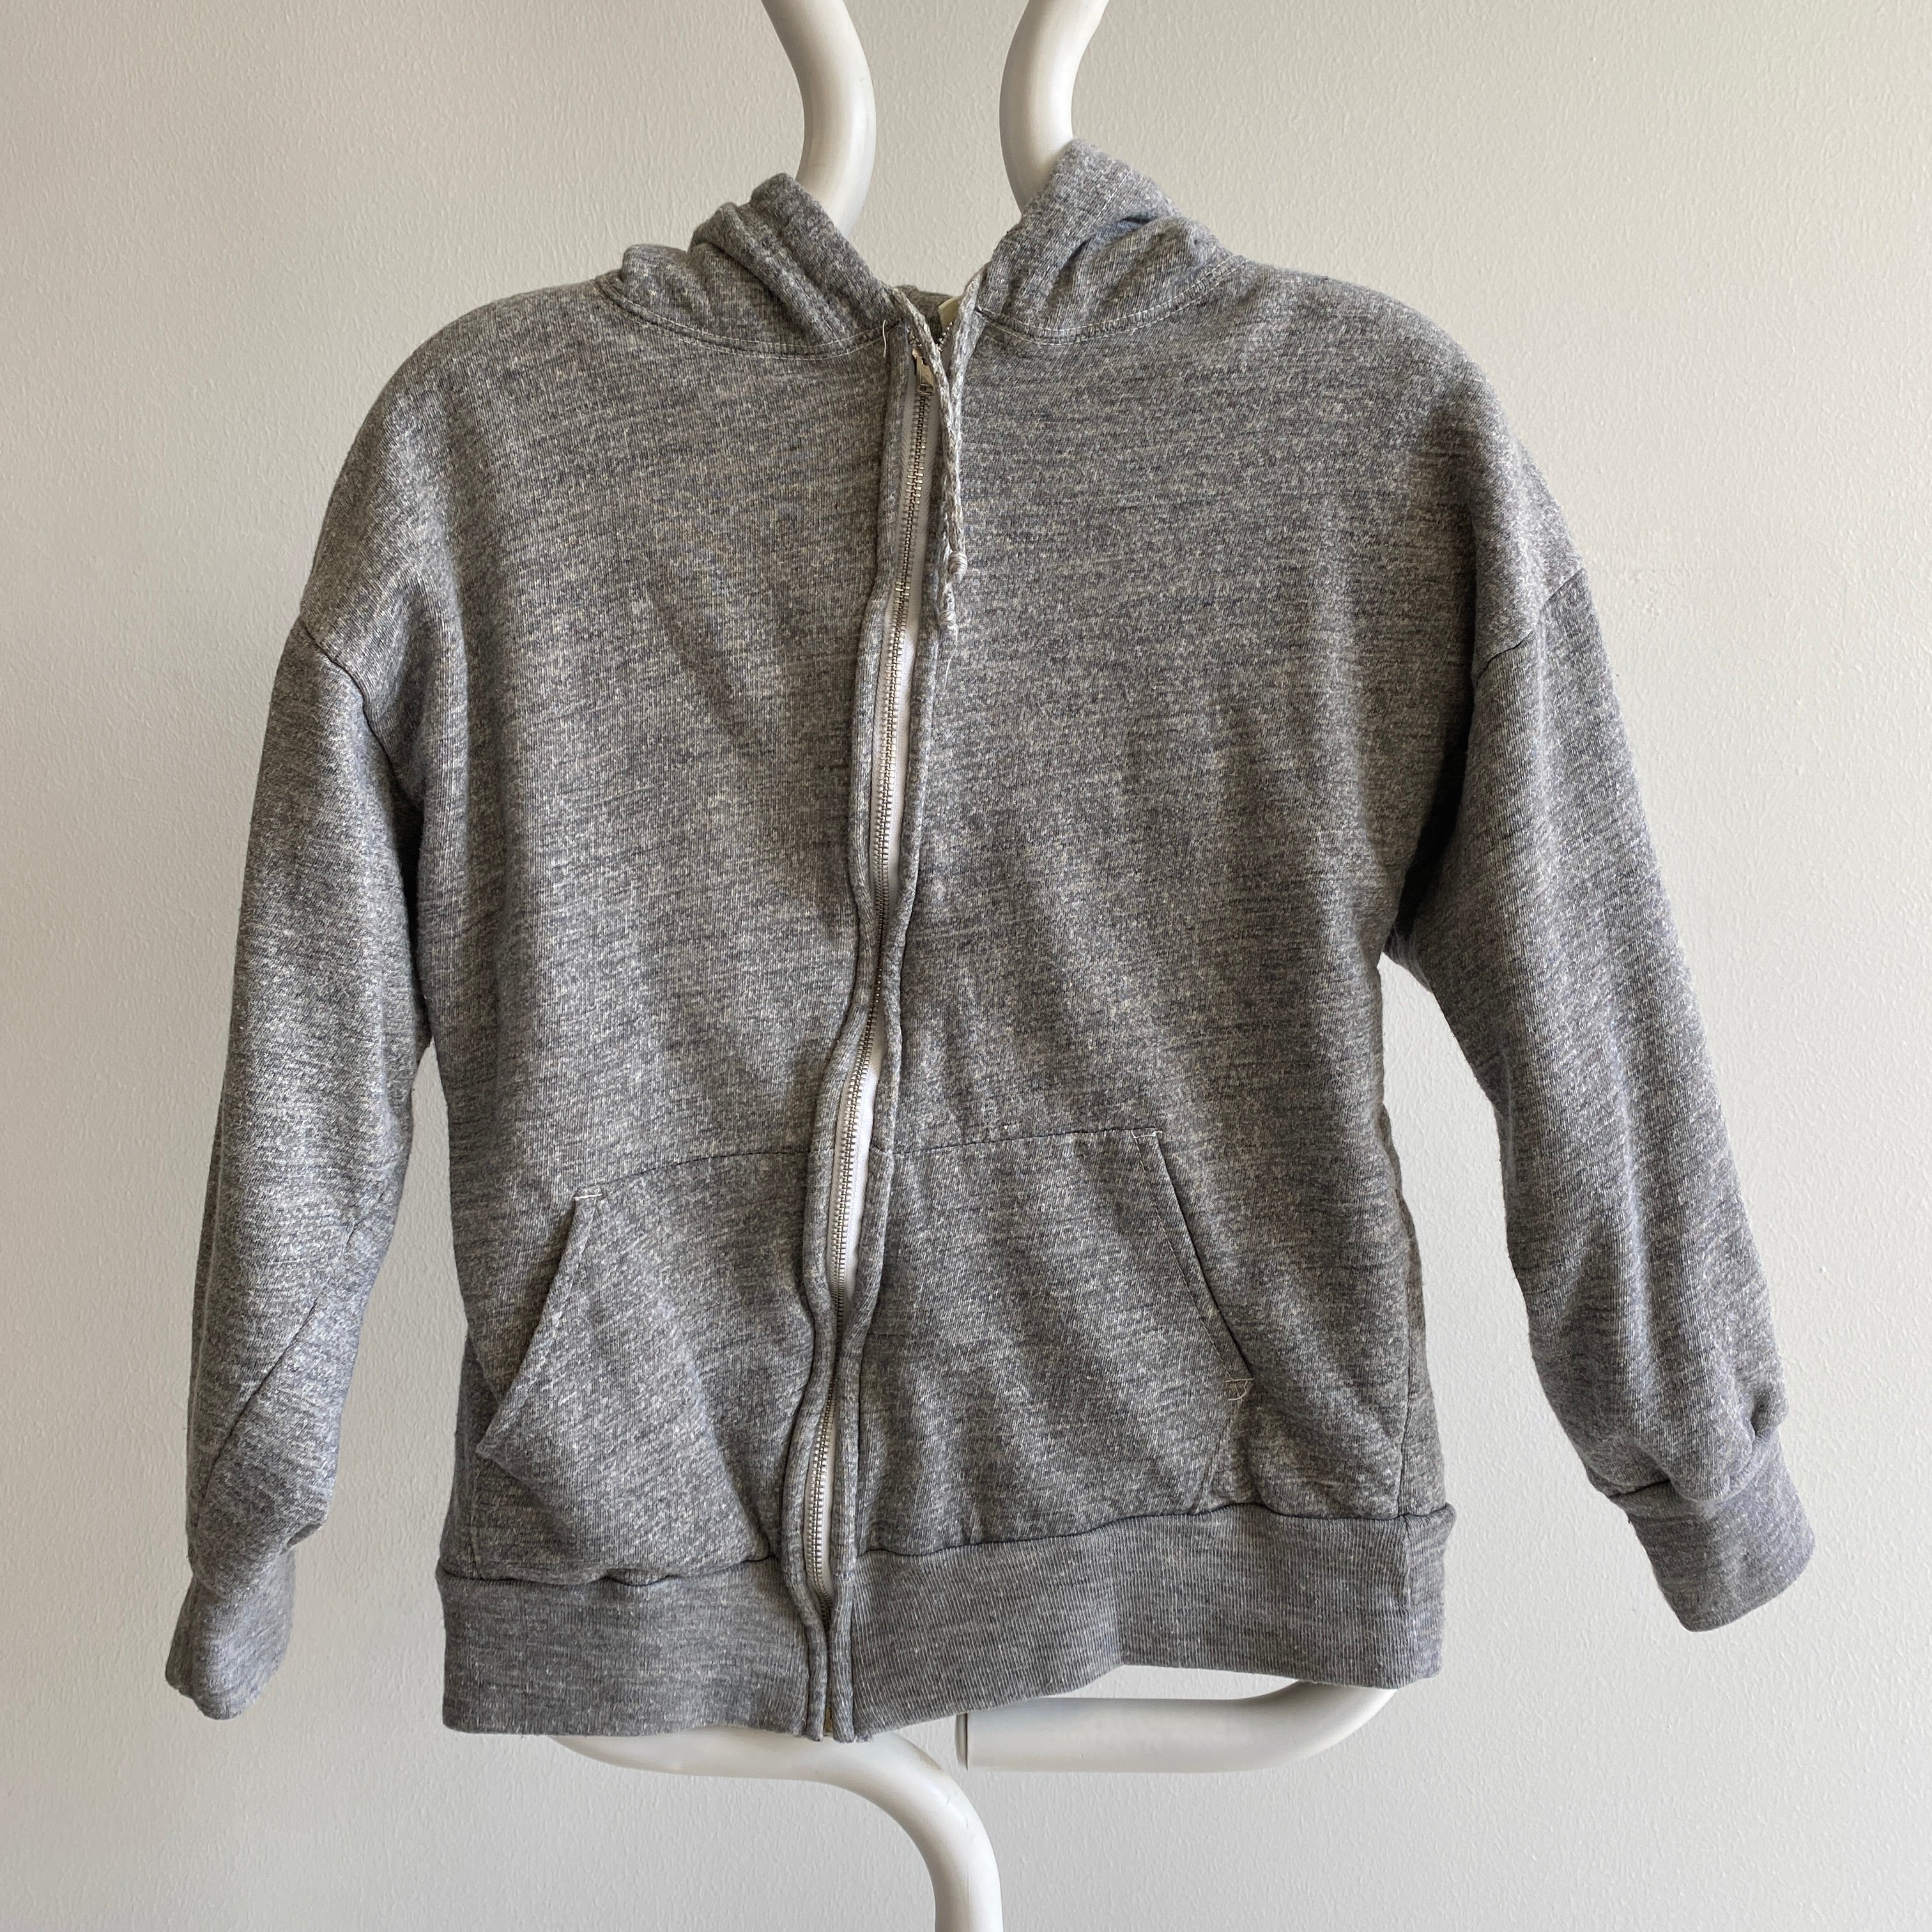 1970s Gray Insulated Zip Up Hoodie - Smaller Size - No Stains